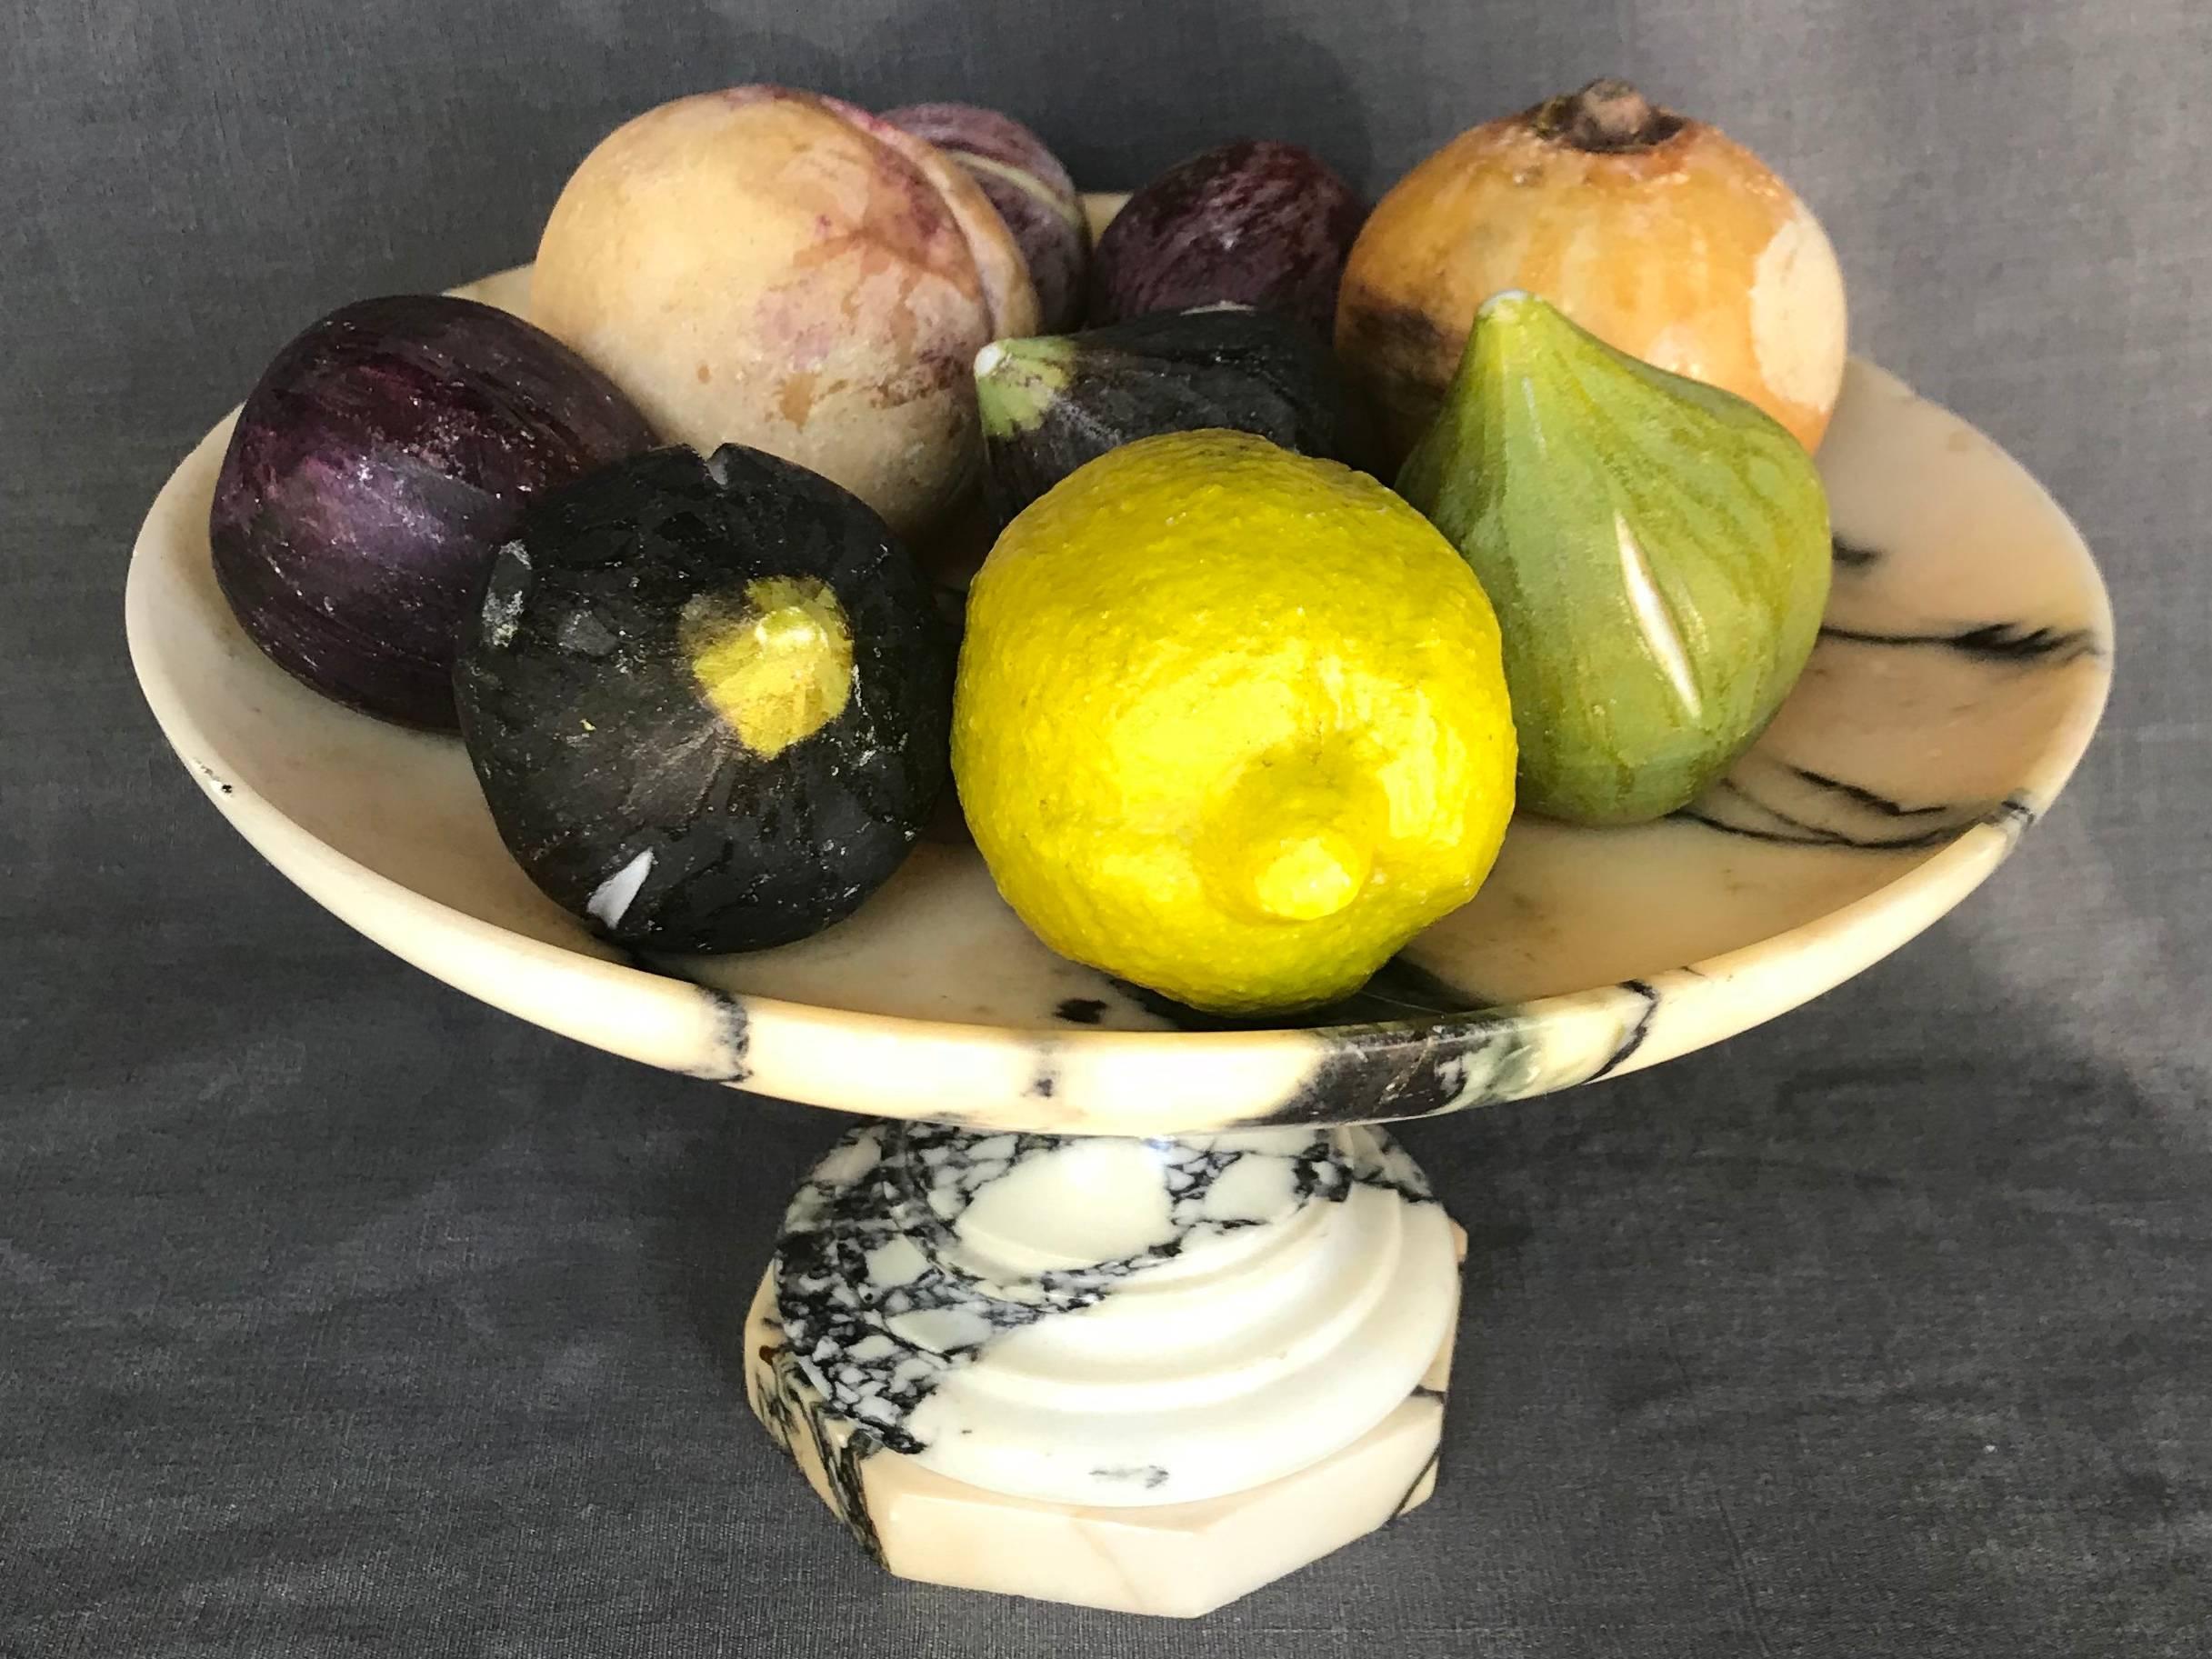 Vintage Italian marble tazza with carved fruit. Carved marble footed tazza with shallow bowl holding marvellous lifelike carved stone fruit including figs, plums, peach, persimmon and a lemon, Italy, circa 1930.
Dimensions: Cake stand 10.75